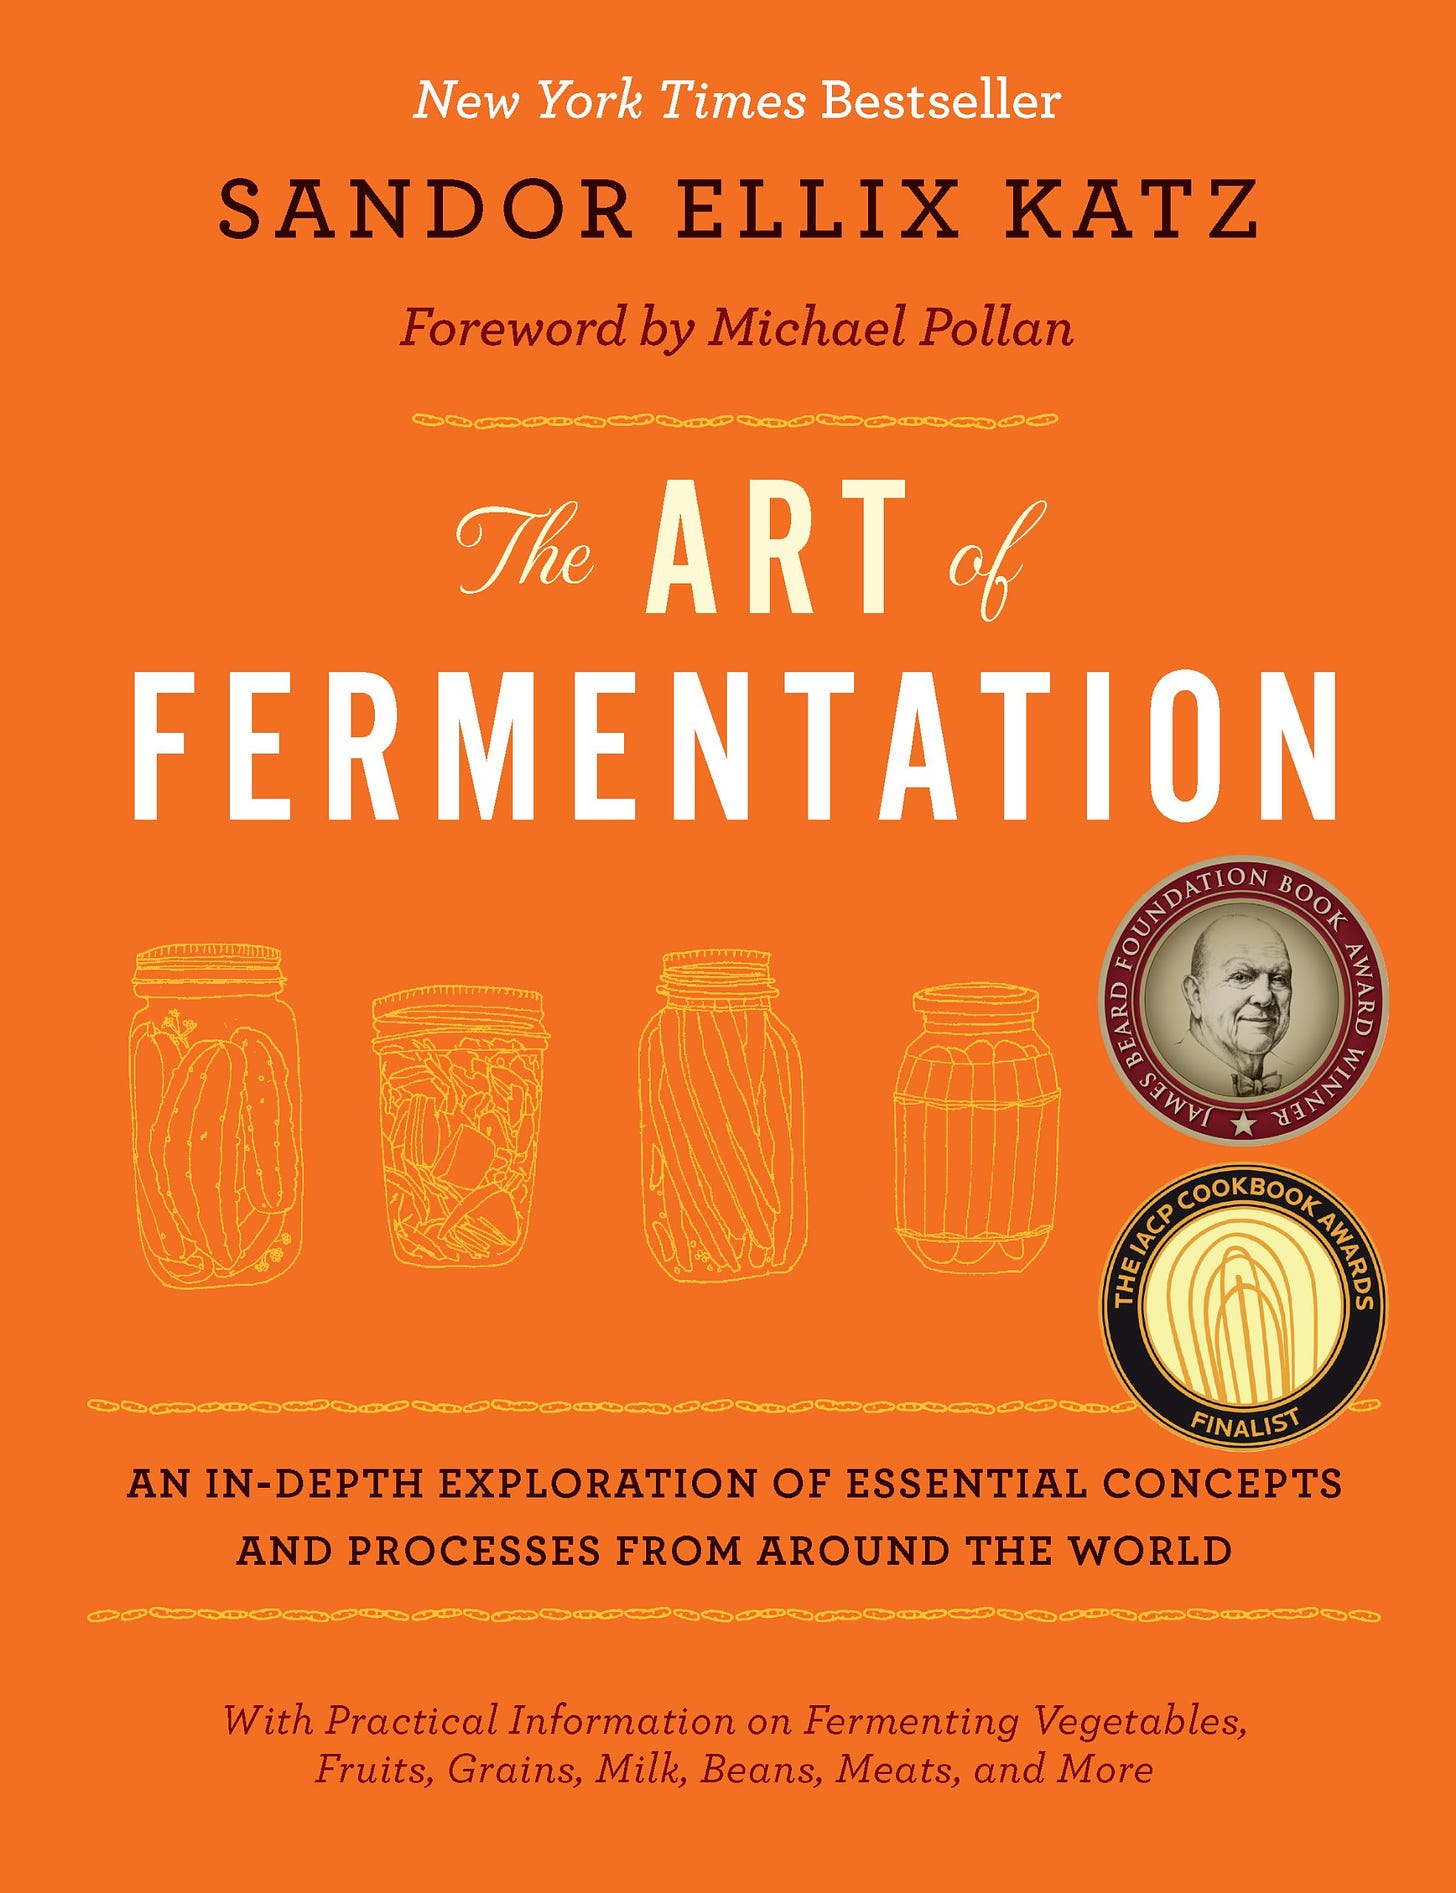 The Art of Fermentation: An In-depth Exploration of Essential Concepts and  Processes from Around the World: Amazon.co.uk: Sandor Ellix Katz: Books